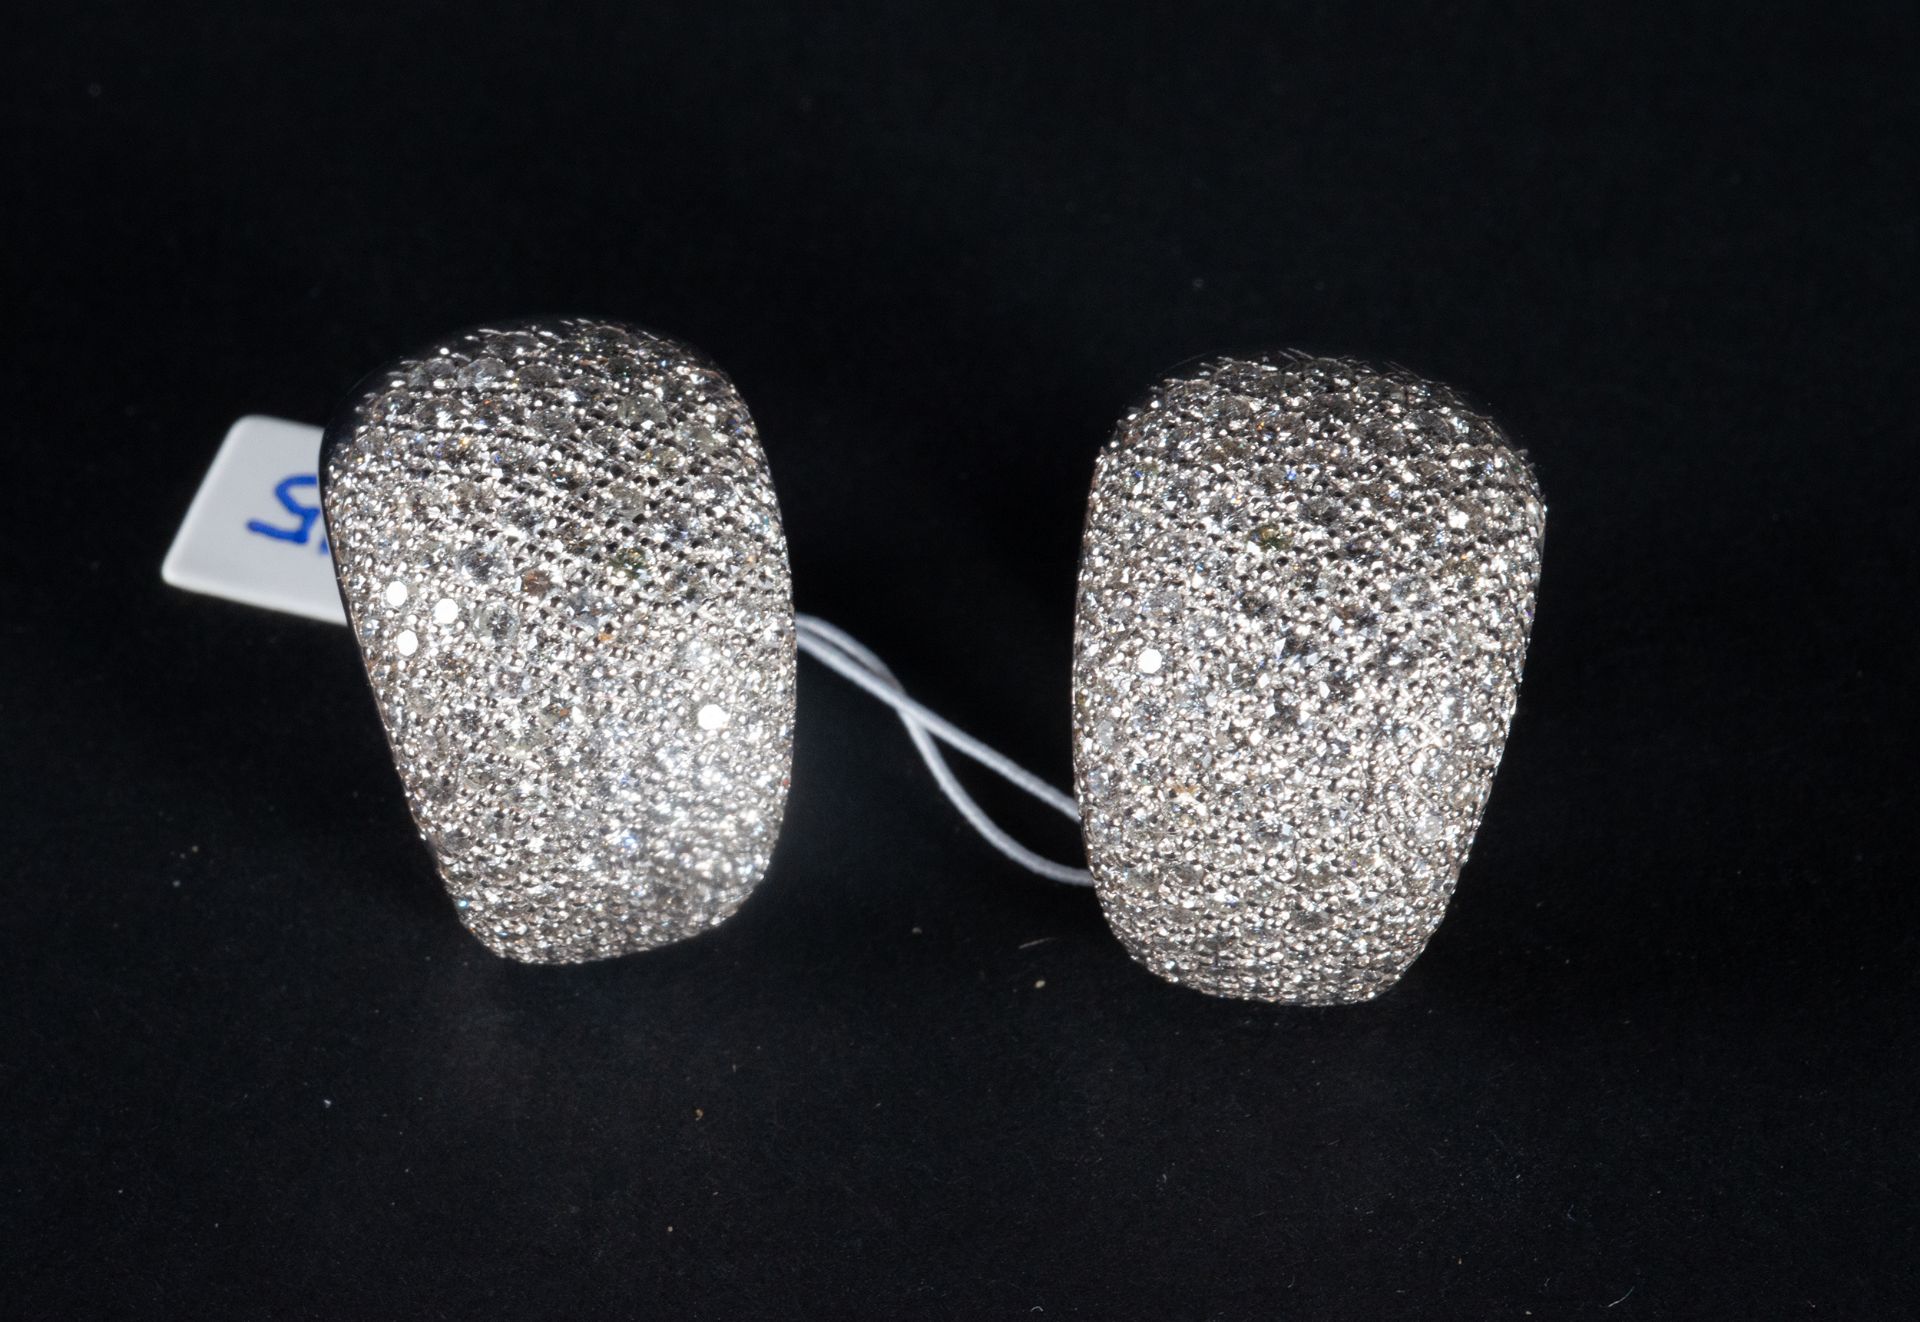 Important pair of earrings in 18k white gold and brilliant cut diamonds